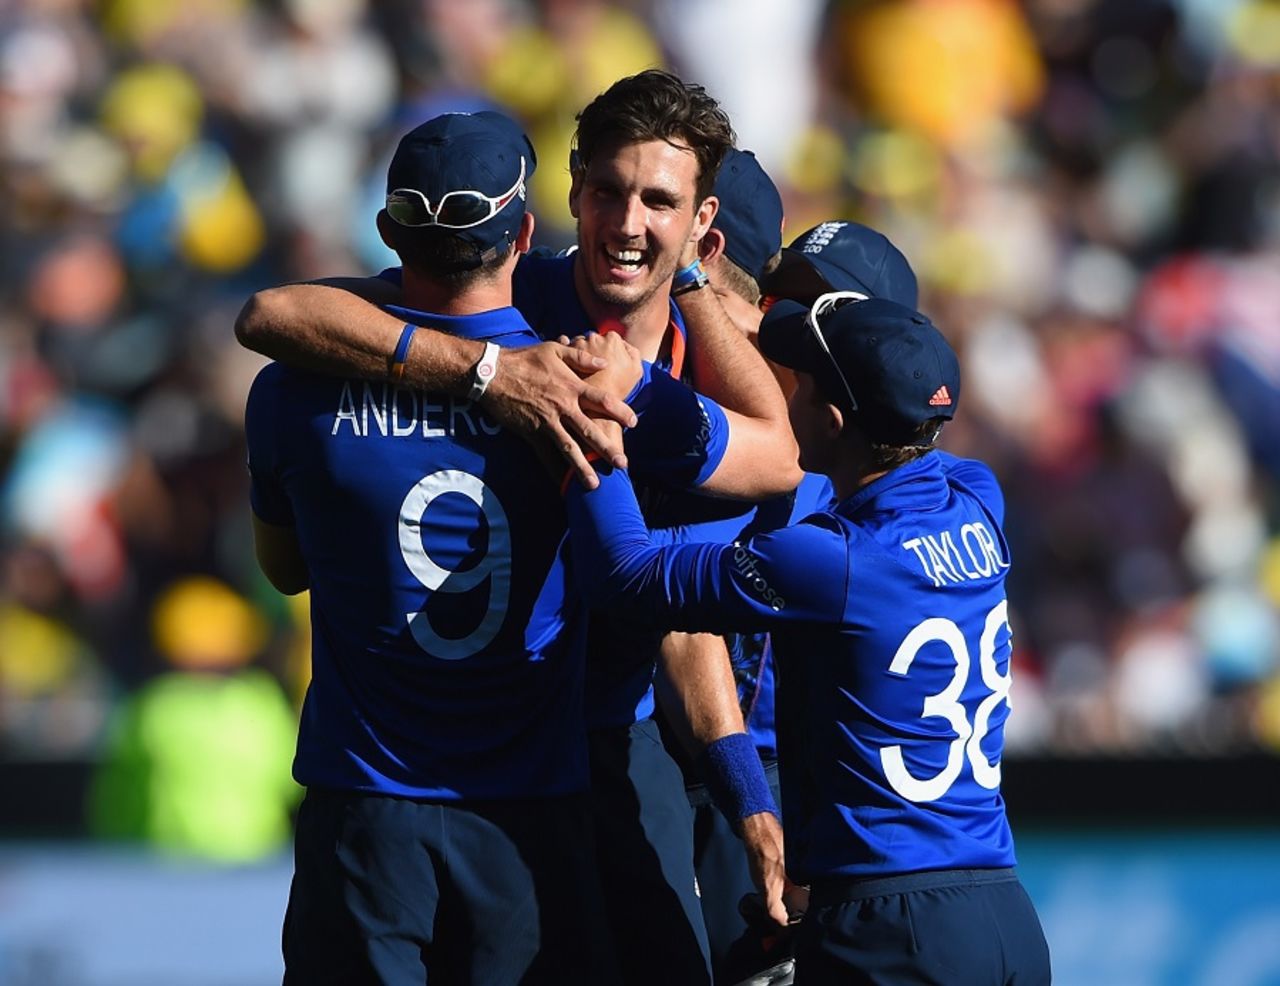 Steve Finn is congratulated by team-mates on his hat-trick, Australia v England, Group A, World Cup 2015, Melbourne, February 14, 2015